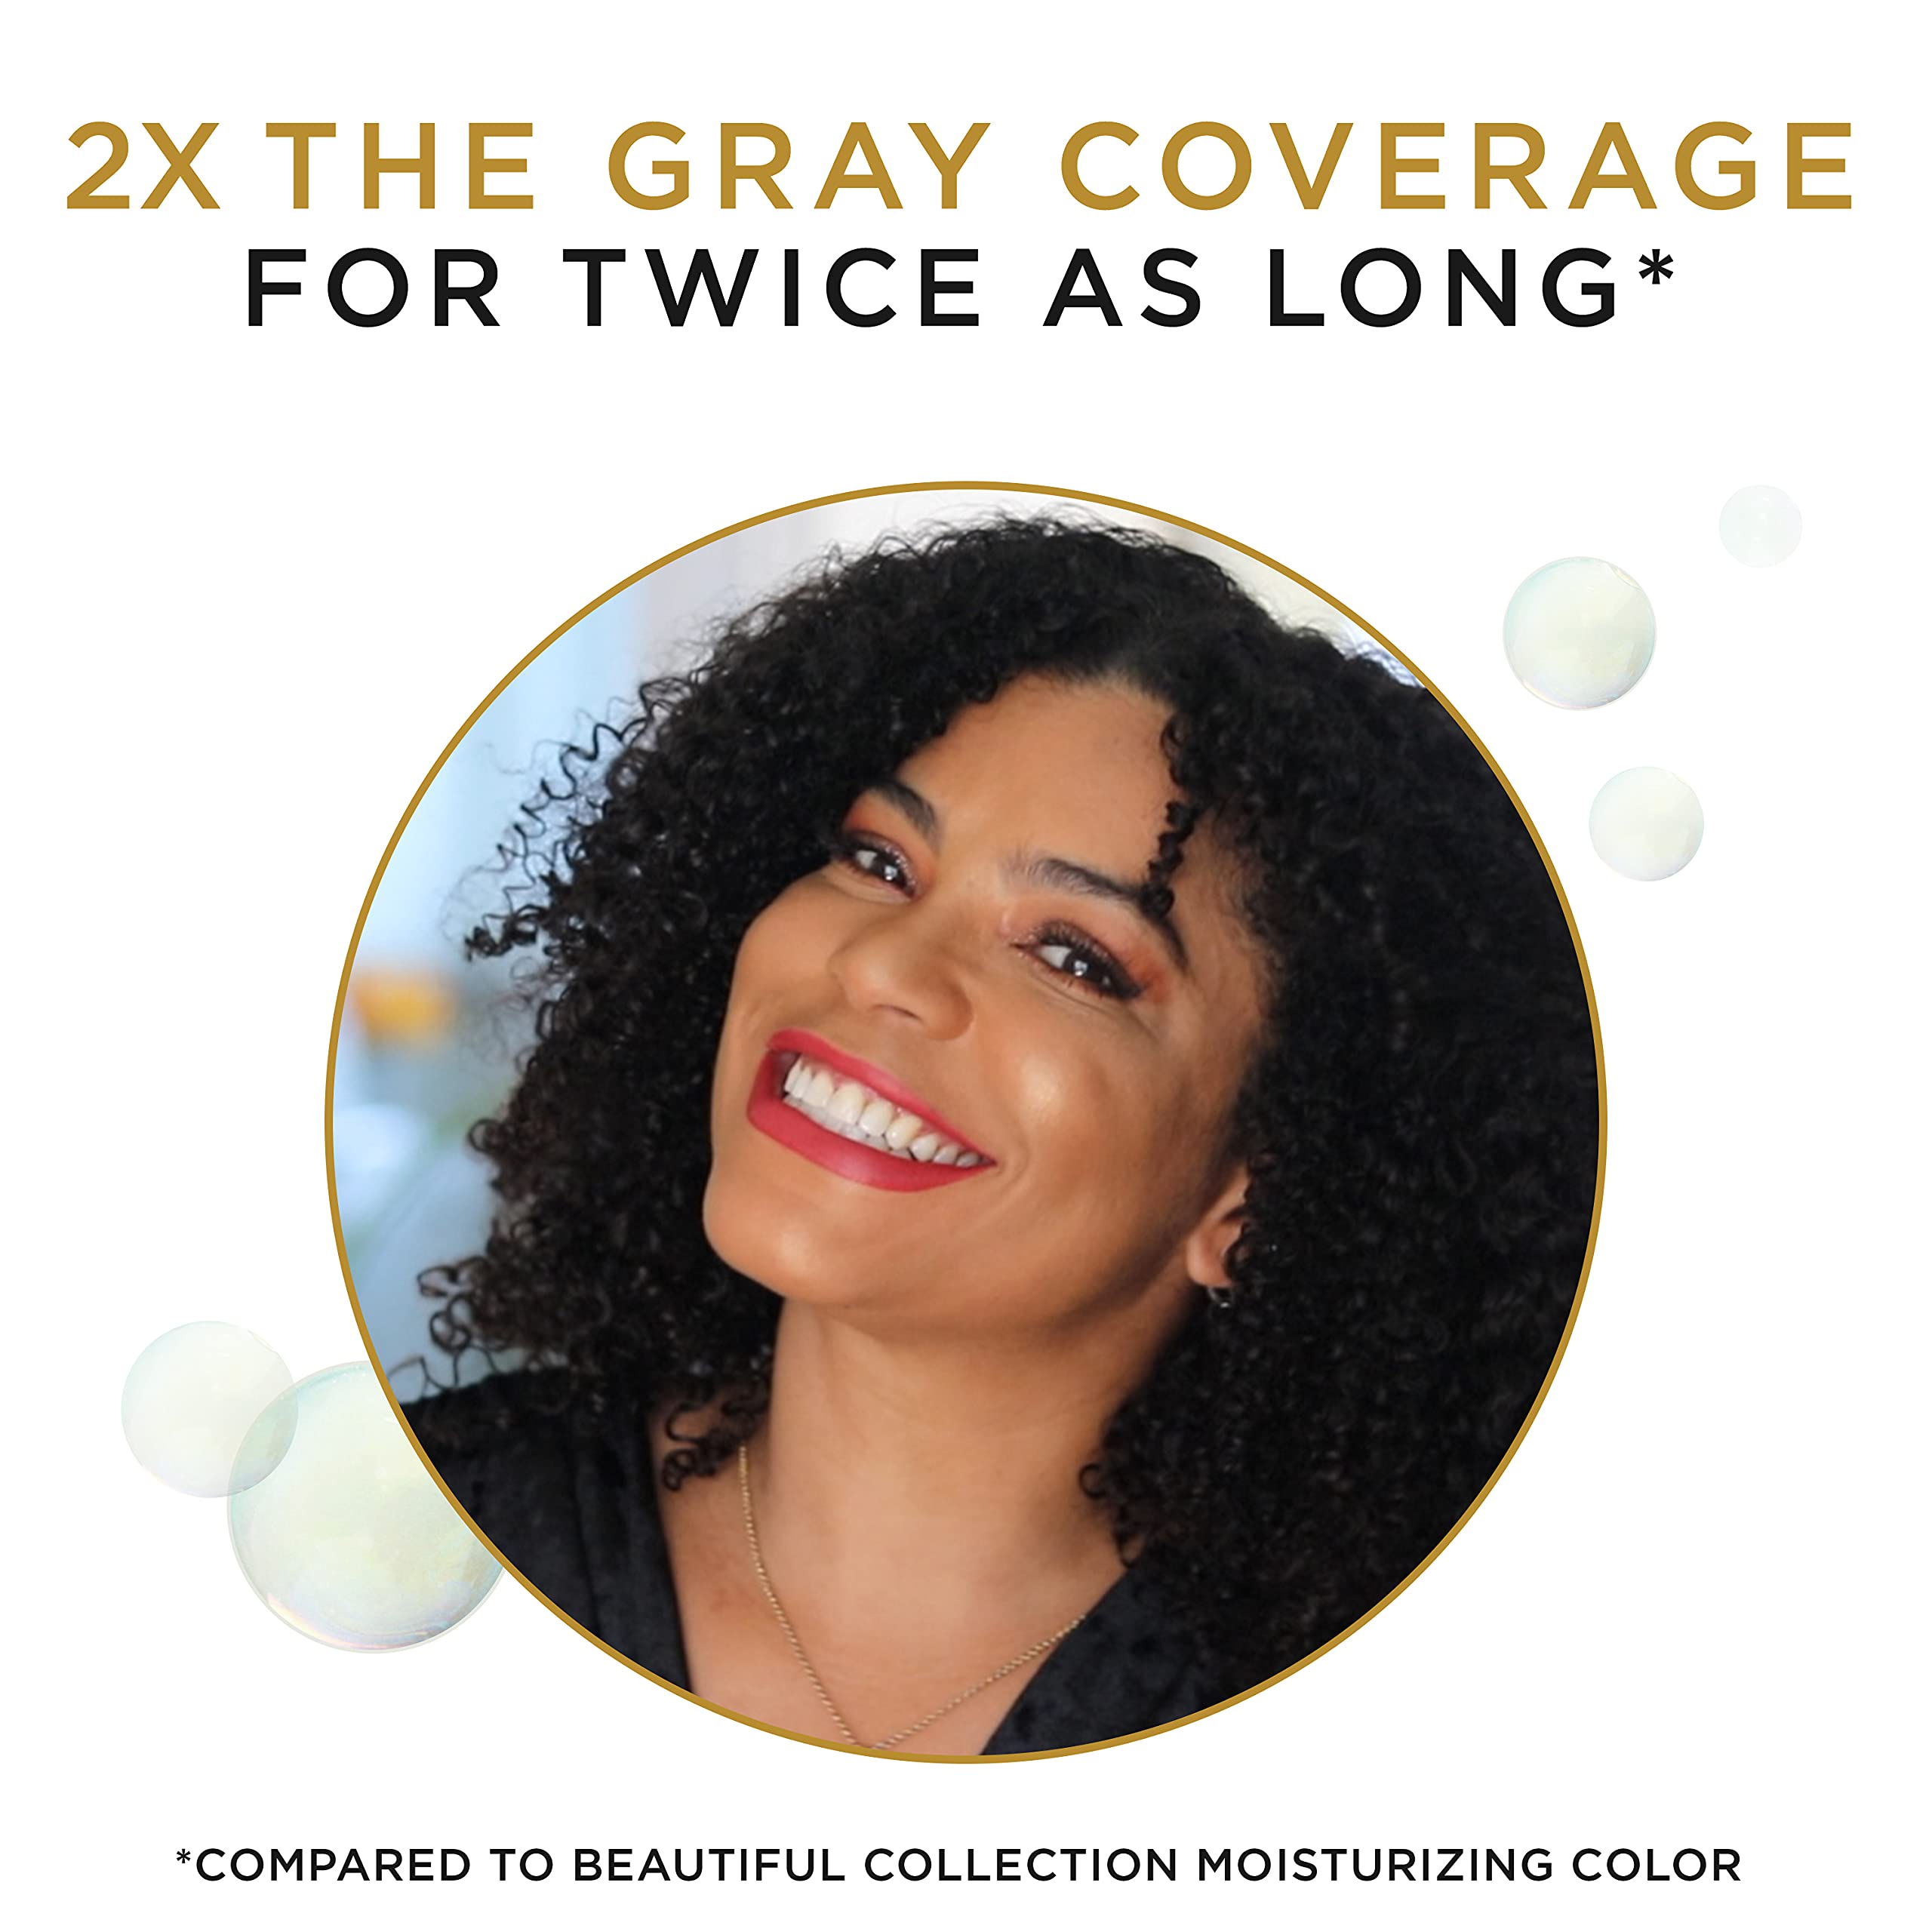 Clairol Professional Beautiful Advanced Gray Solutions, Semi-Permanent Hair Color for Gray Coverage